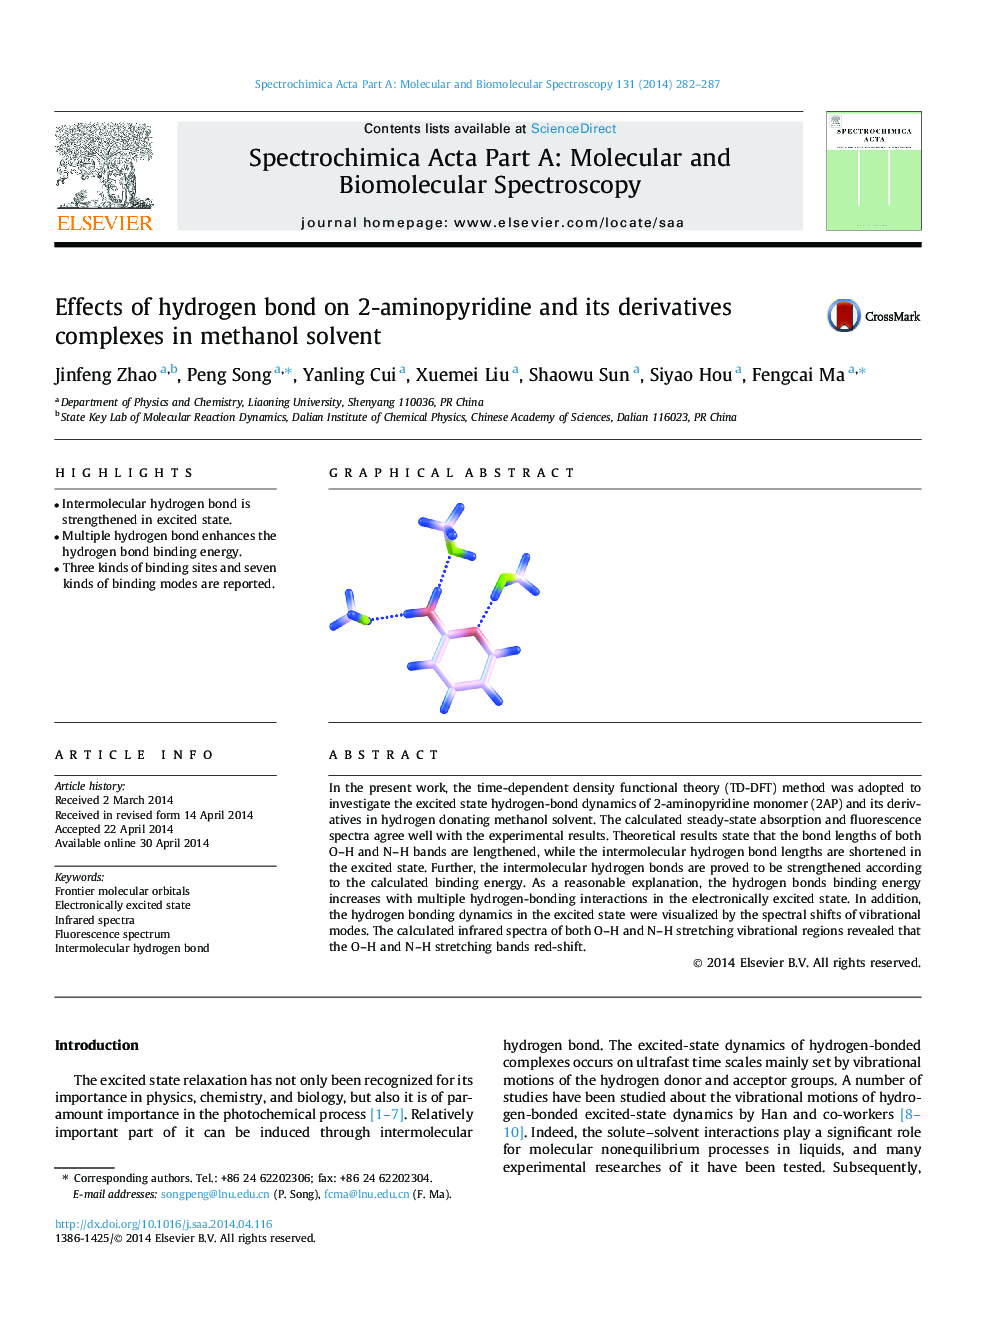 Effects of hydrogen bond on 2-aminopyridine and its derivatives complexes in methanol solvent